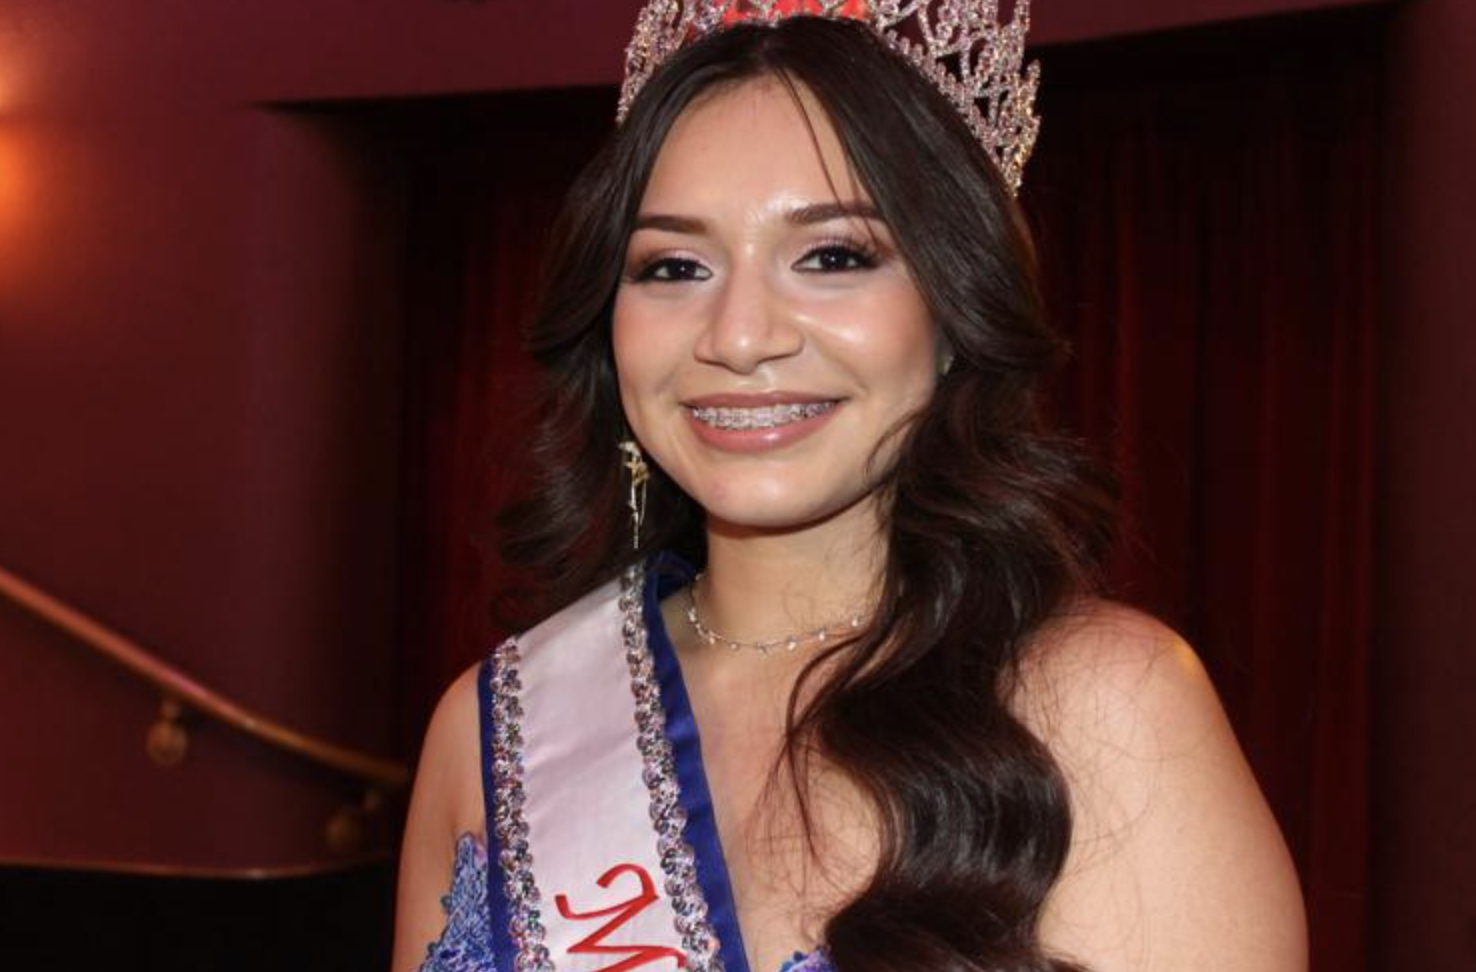 Giselle Aparicio is Crowned Miss Fontana 2022 During Pageant